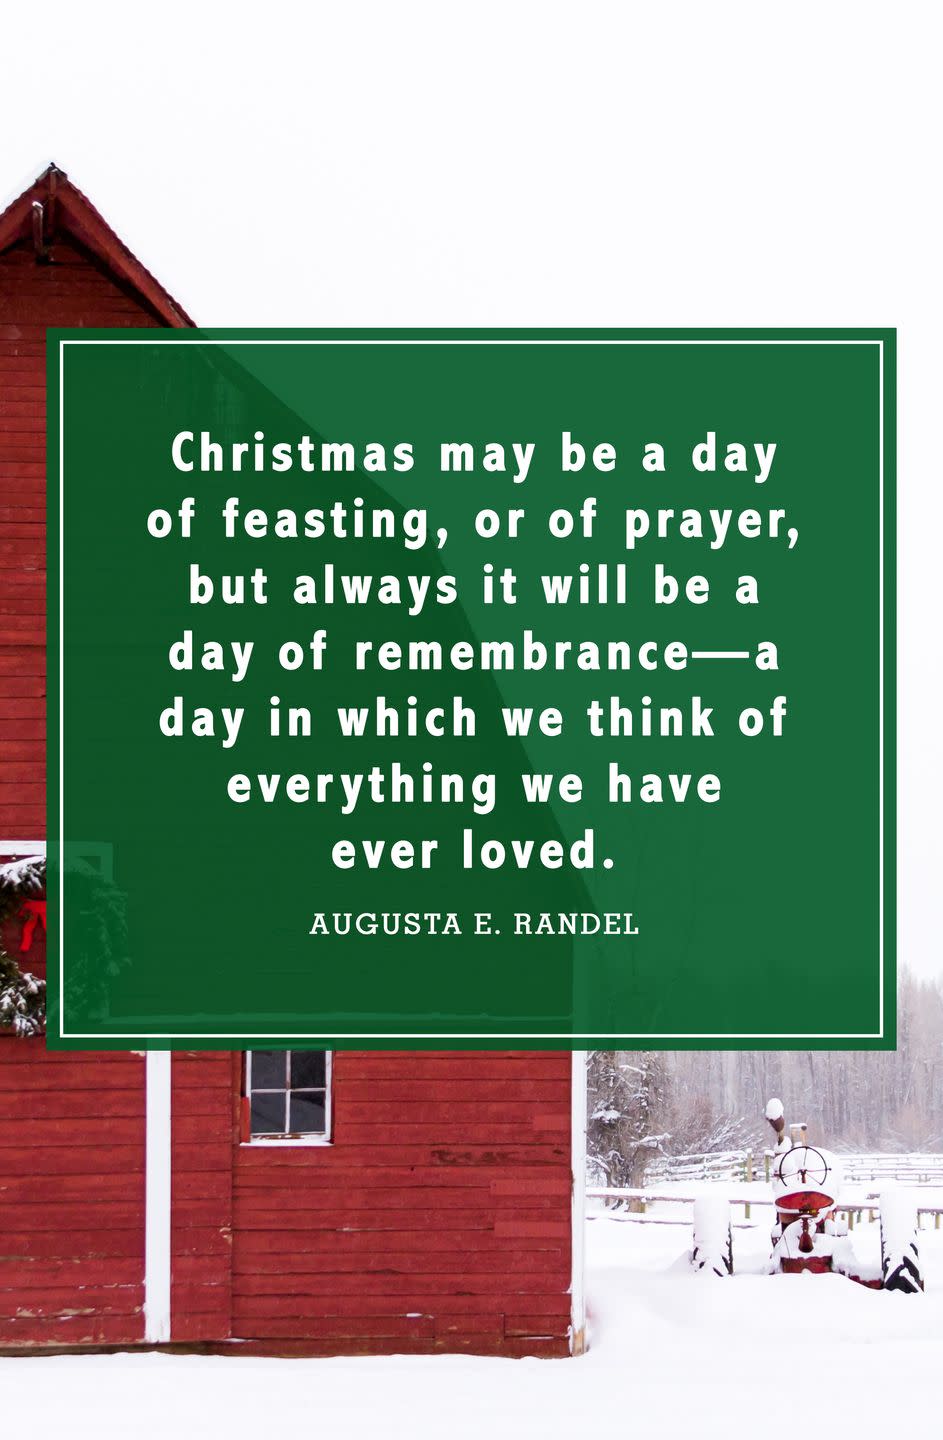 <p>“Christmas may be a day of feasting, or of prayer, but always it will be a day of remembrance—a day in which we think of everything we have ever loved.”</p>